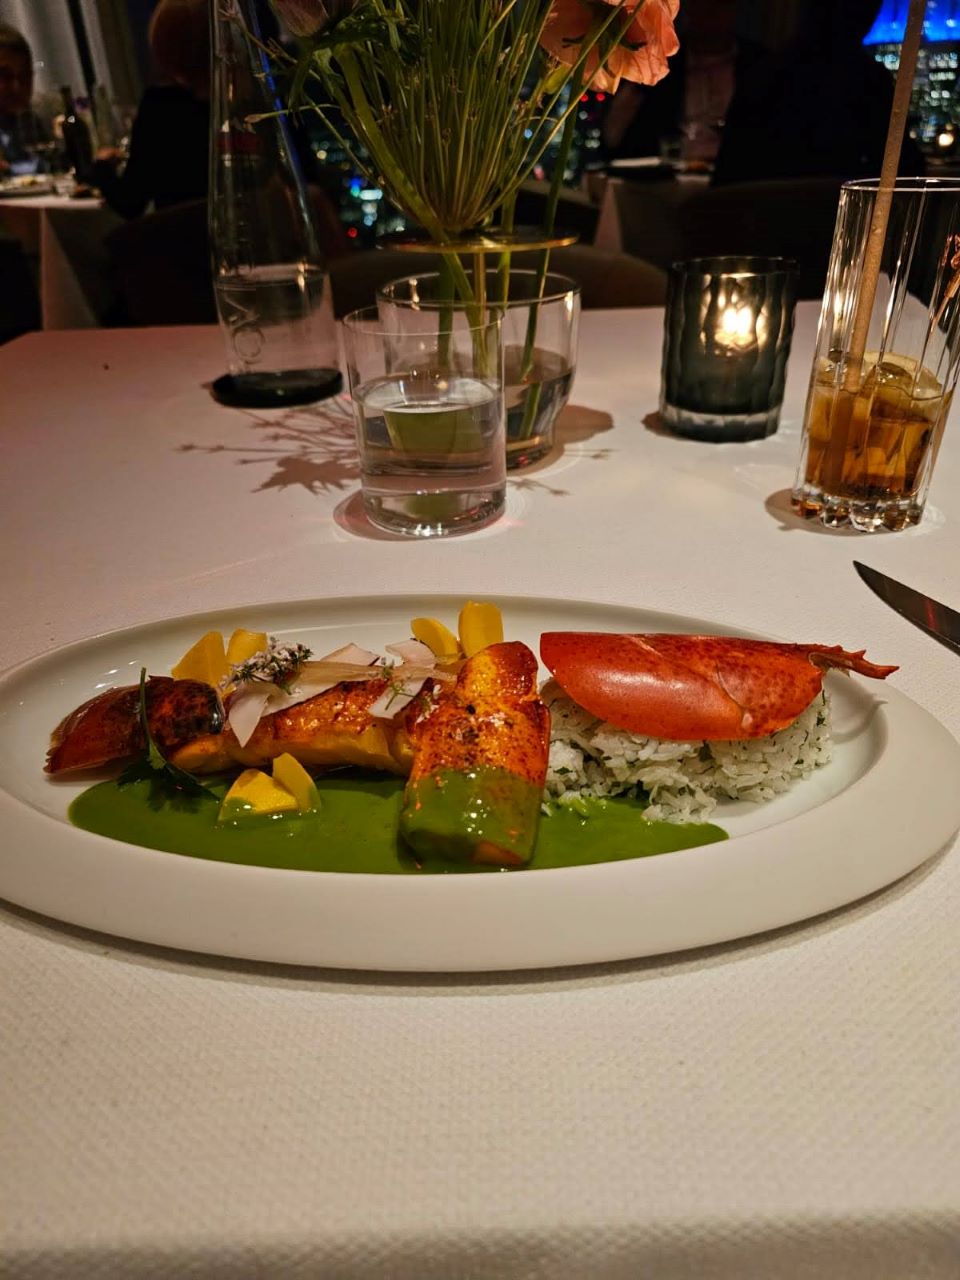 Lobster at Centurion lounge NYC